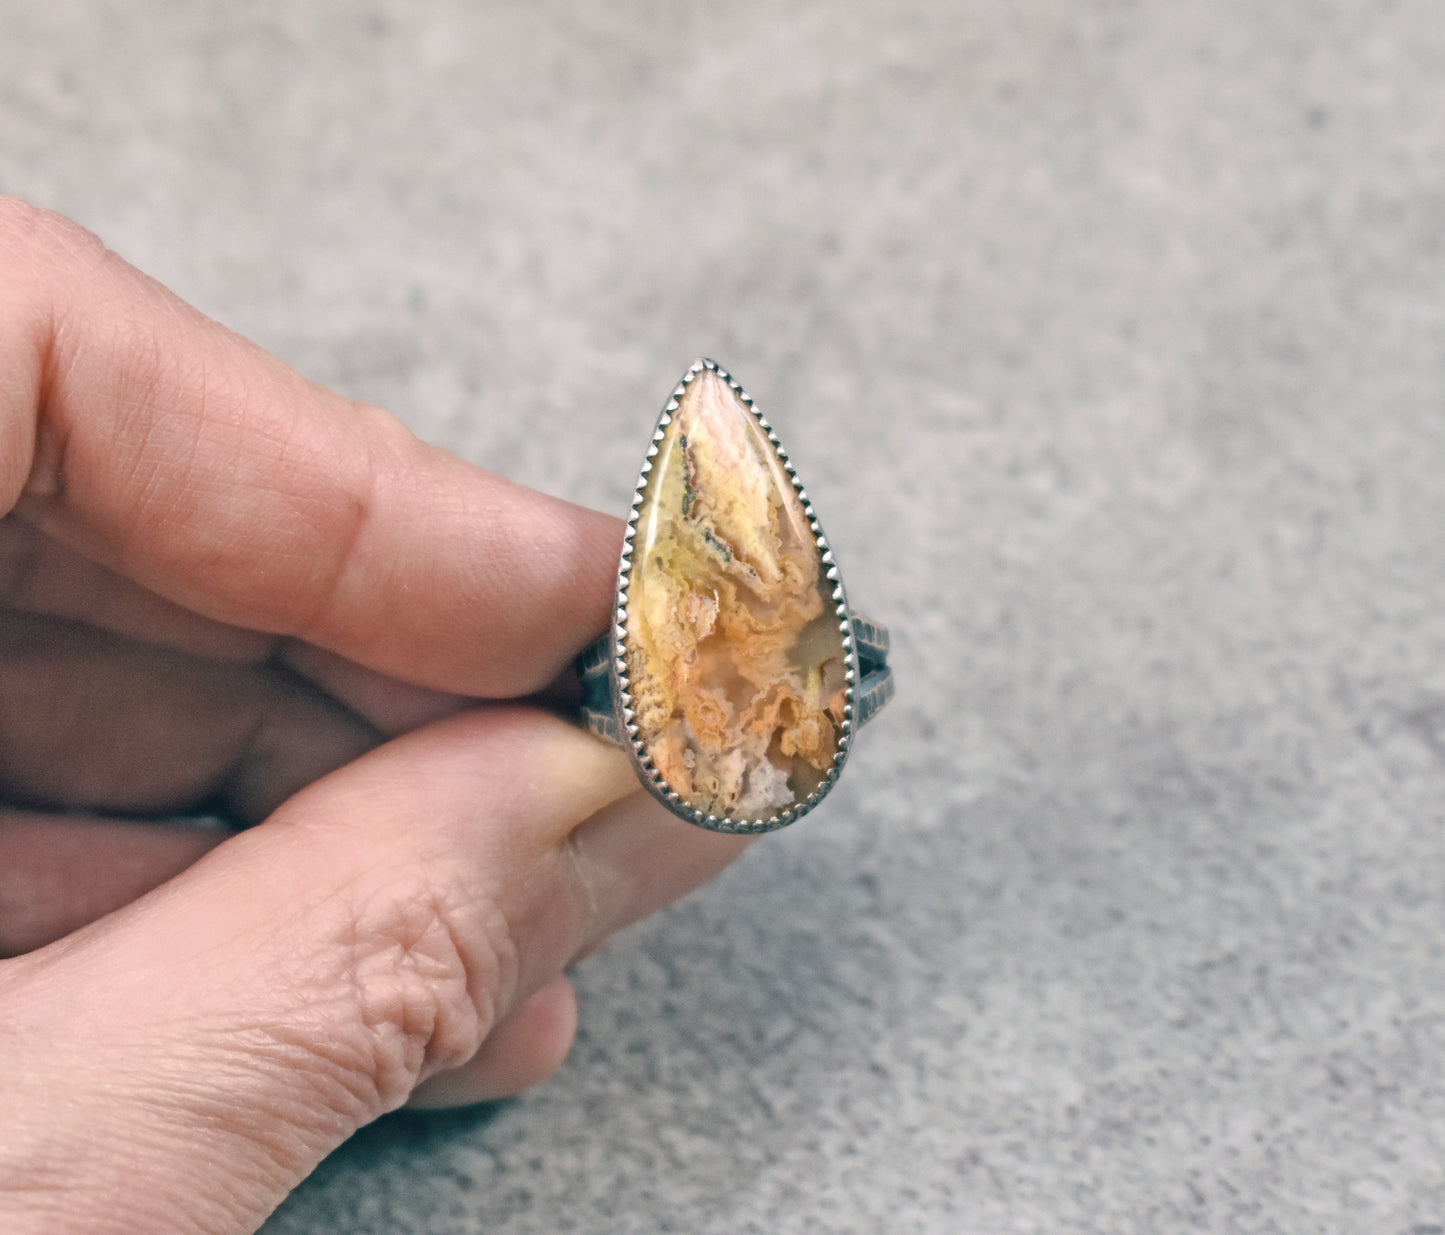 Yellow Plume Agate Ring in Fine and Sterling Silver with Split Band, Rustic Silversmith Jewelry, Size 6.75